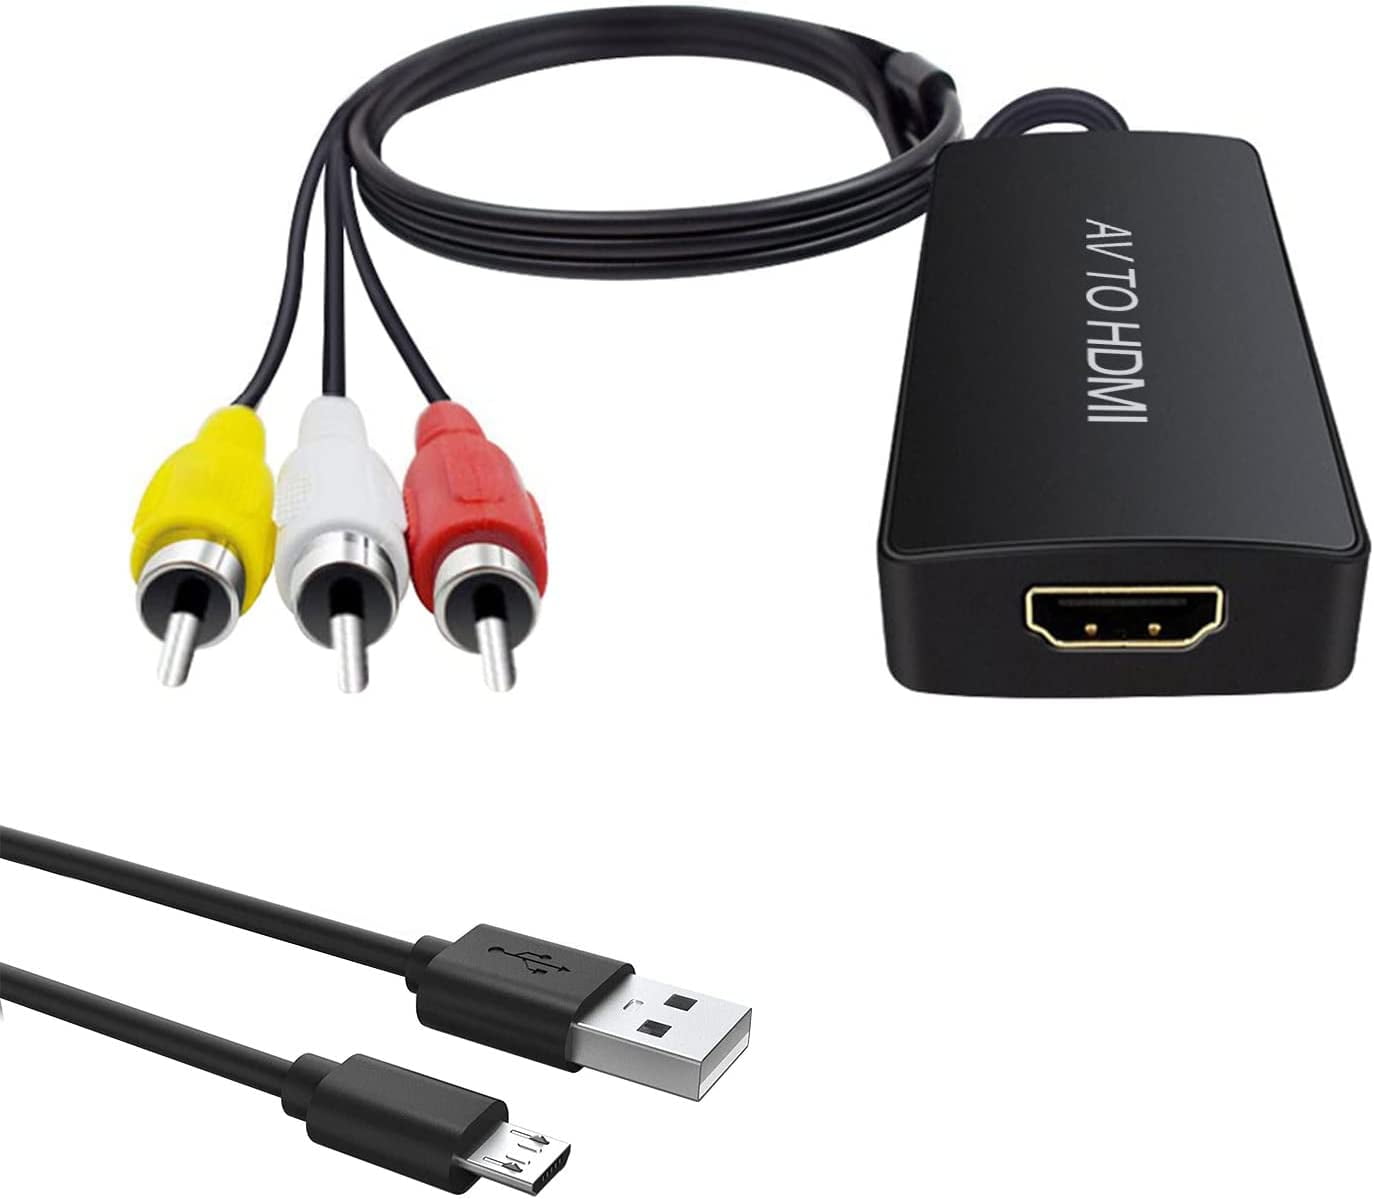 gør dig irriteret Misforståelse Penge gummi Male RCA to HDMI Converter 3RCA/CVBS/AV/Composite to HDMI Converter  Adapter, Connect PS2/PS3, N64, STB, VHS, VCR, Old DVD Blu-ray Players etc.  to HDMI TV (Male RCA) - Walmart.com